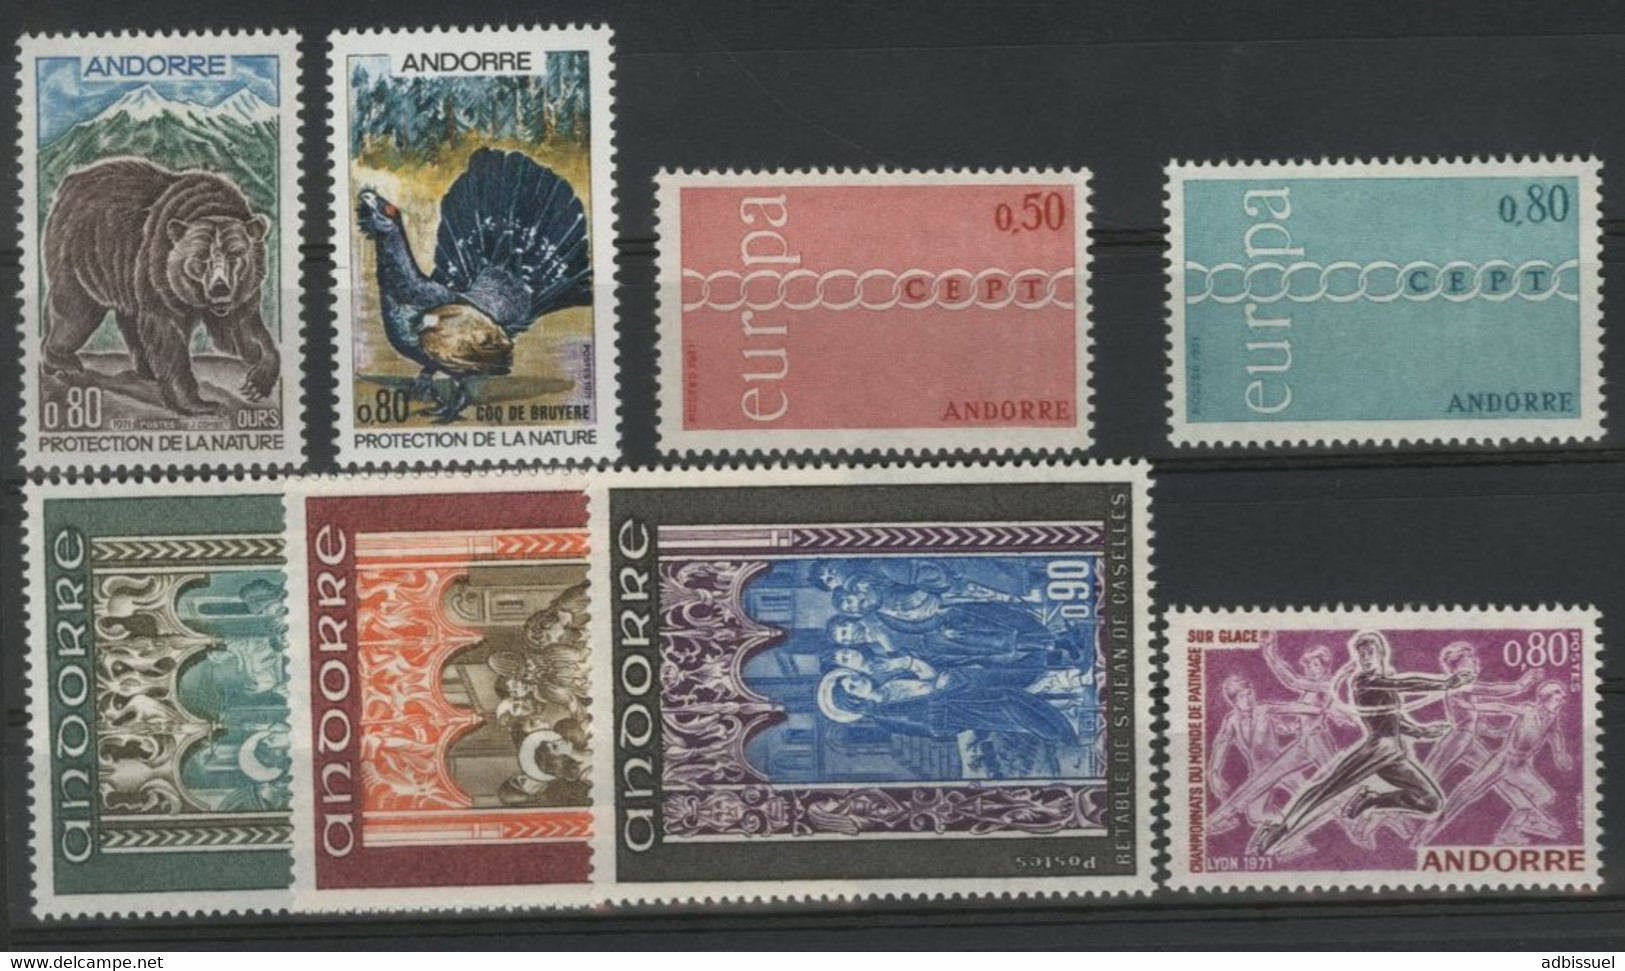 ANDORRE FRANCAIS 1971 ANNEE COMPLETE COTE 69.4 € N° 209 à 216 NEUFS ** (MNH). TB - Full Years